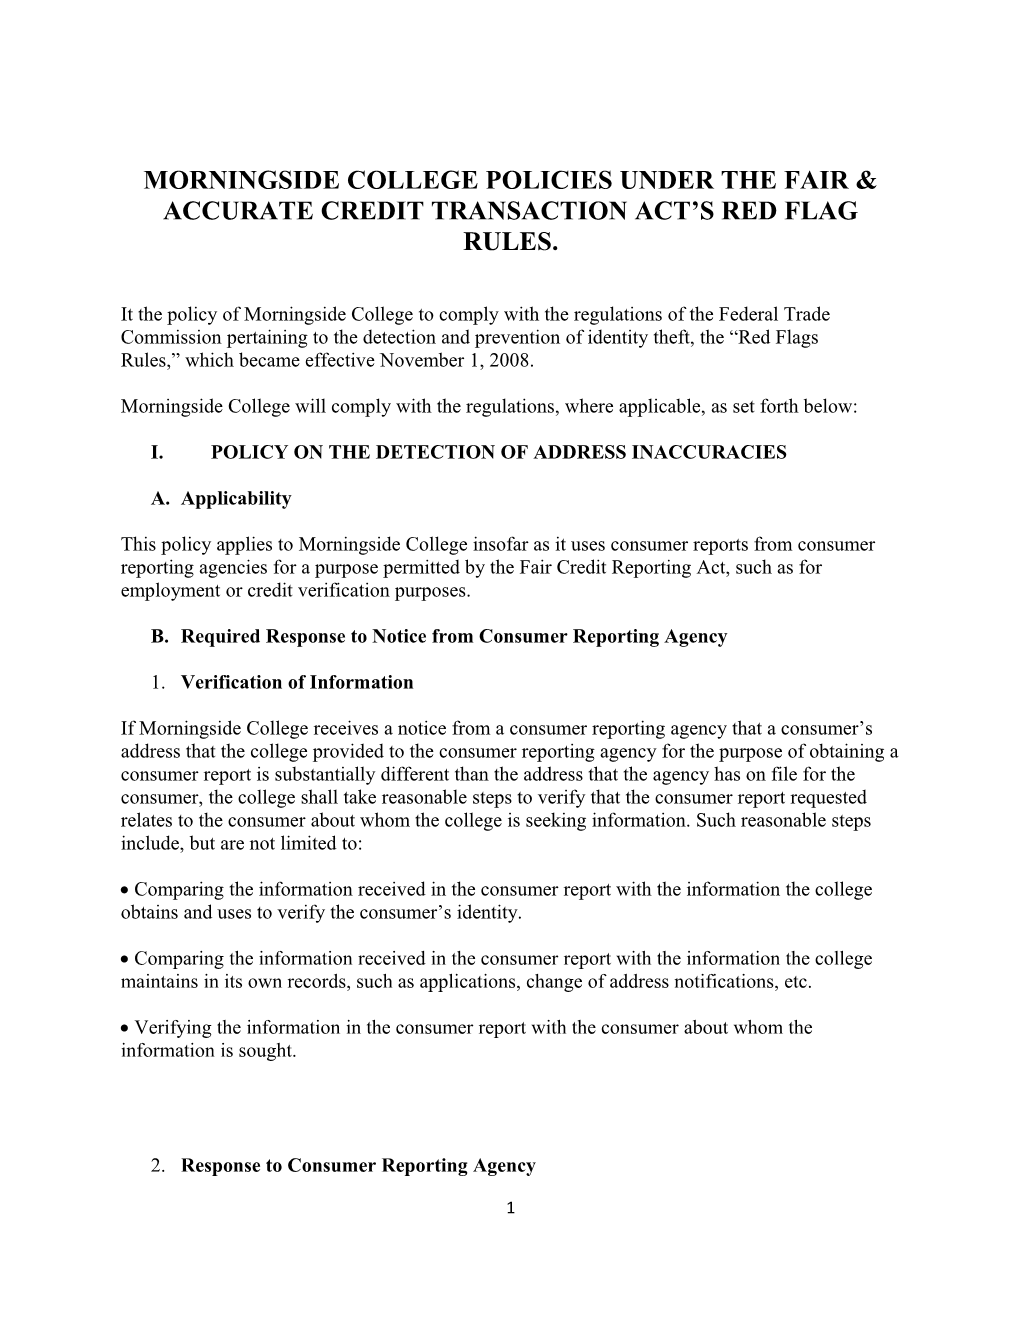 Morningside College Policies Under the Fair & Accurate Credittransaction Act S Red Flag Rules